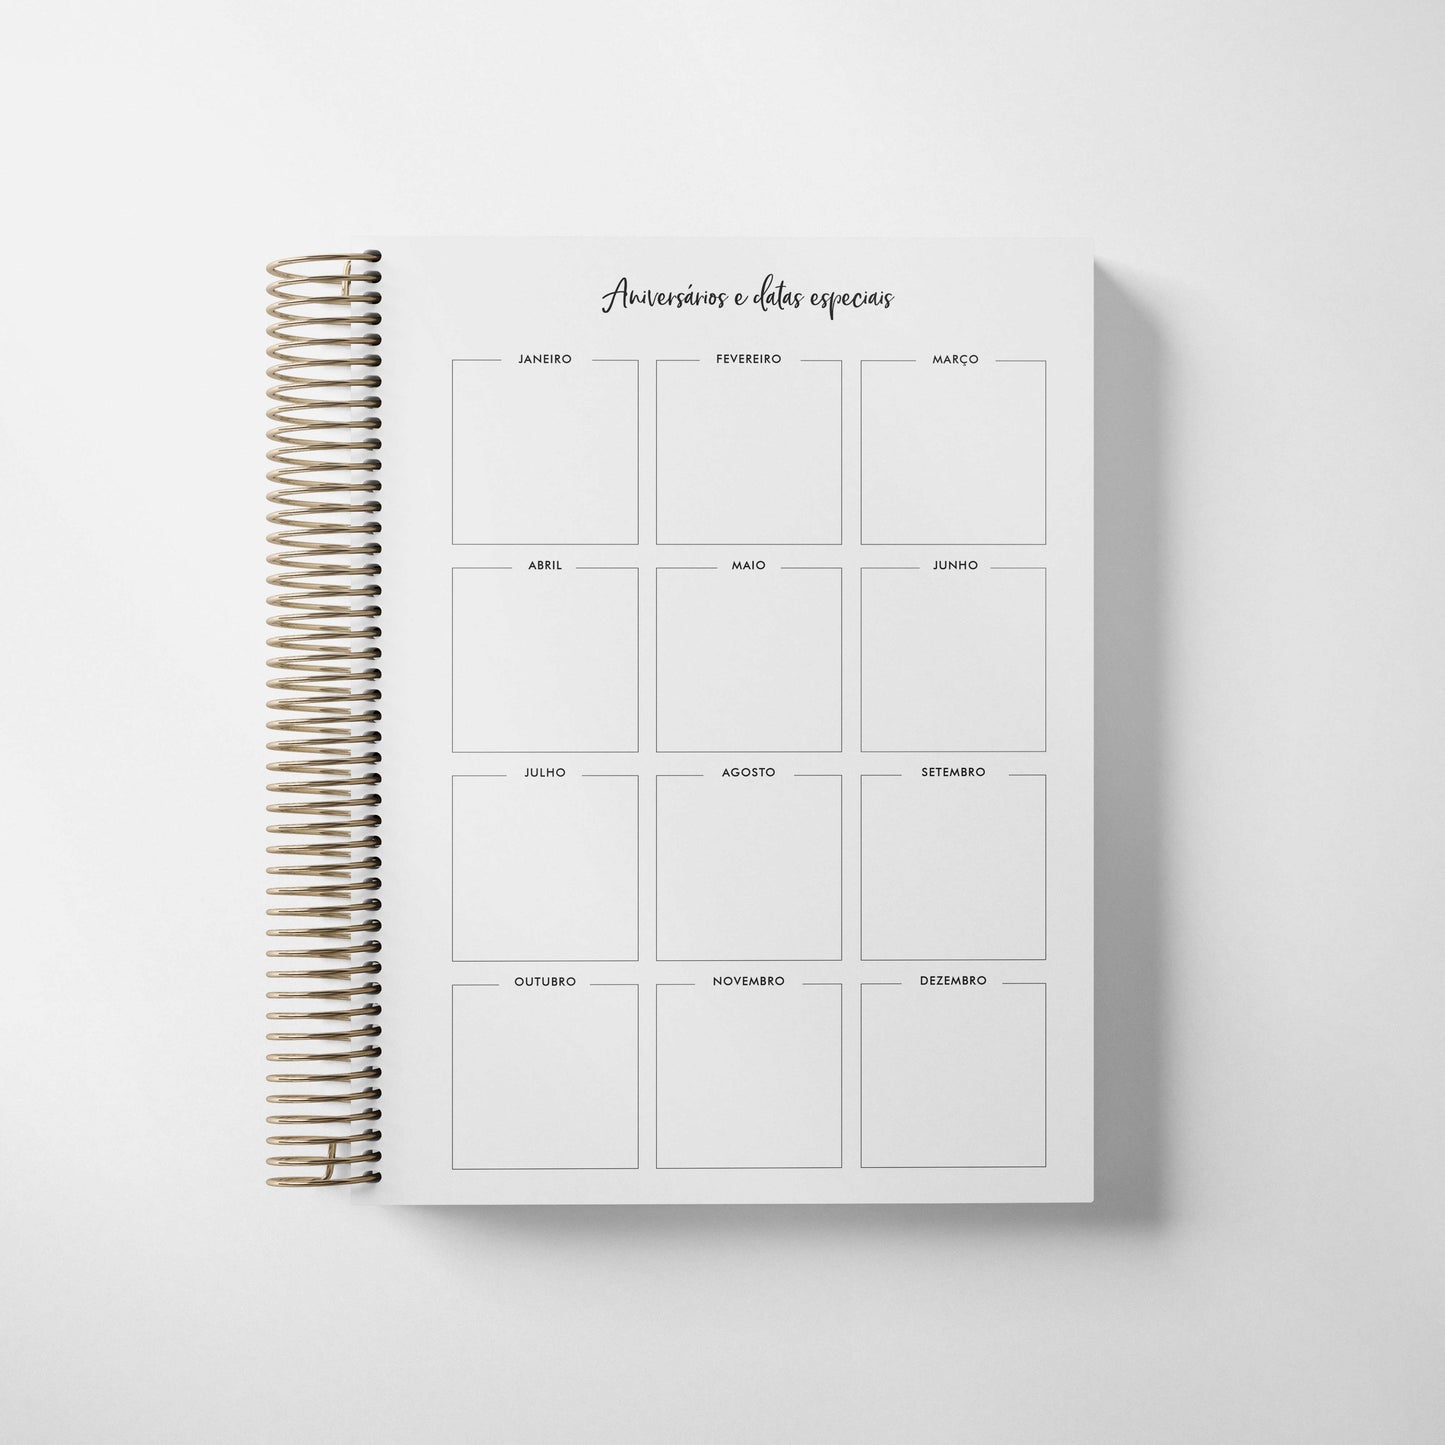 STRIPES + GOLD DOTS | LIFE PLANNER 2024 * 12 MONTH AGENDA * ESPECIAL HOLIDAY SALE *